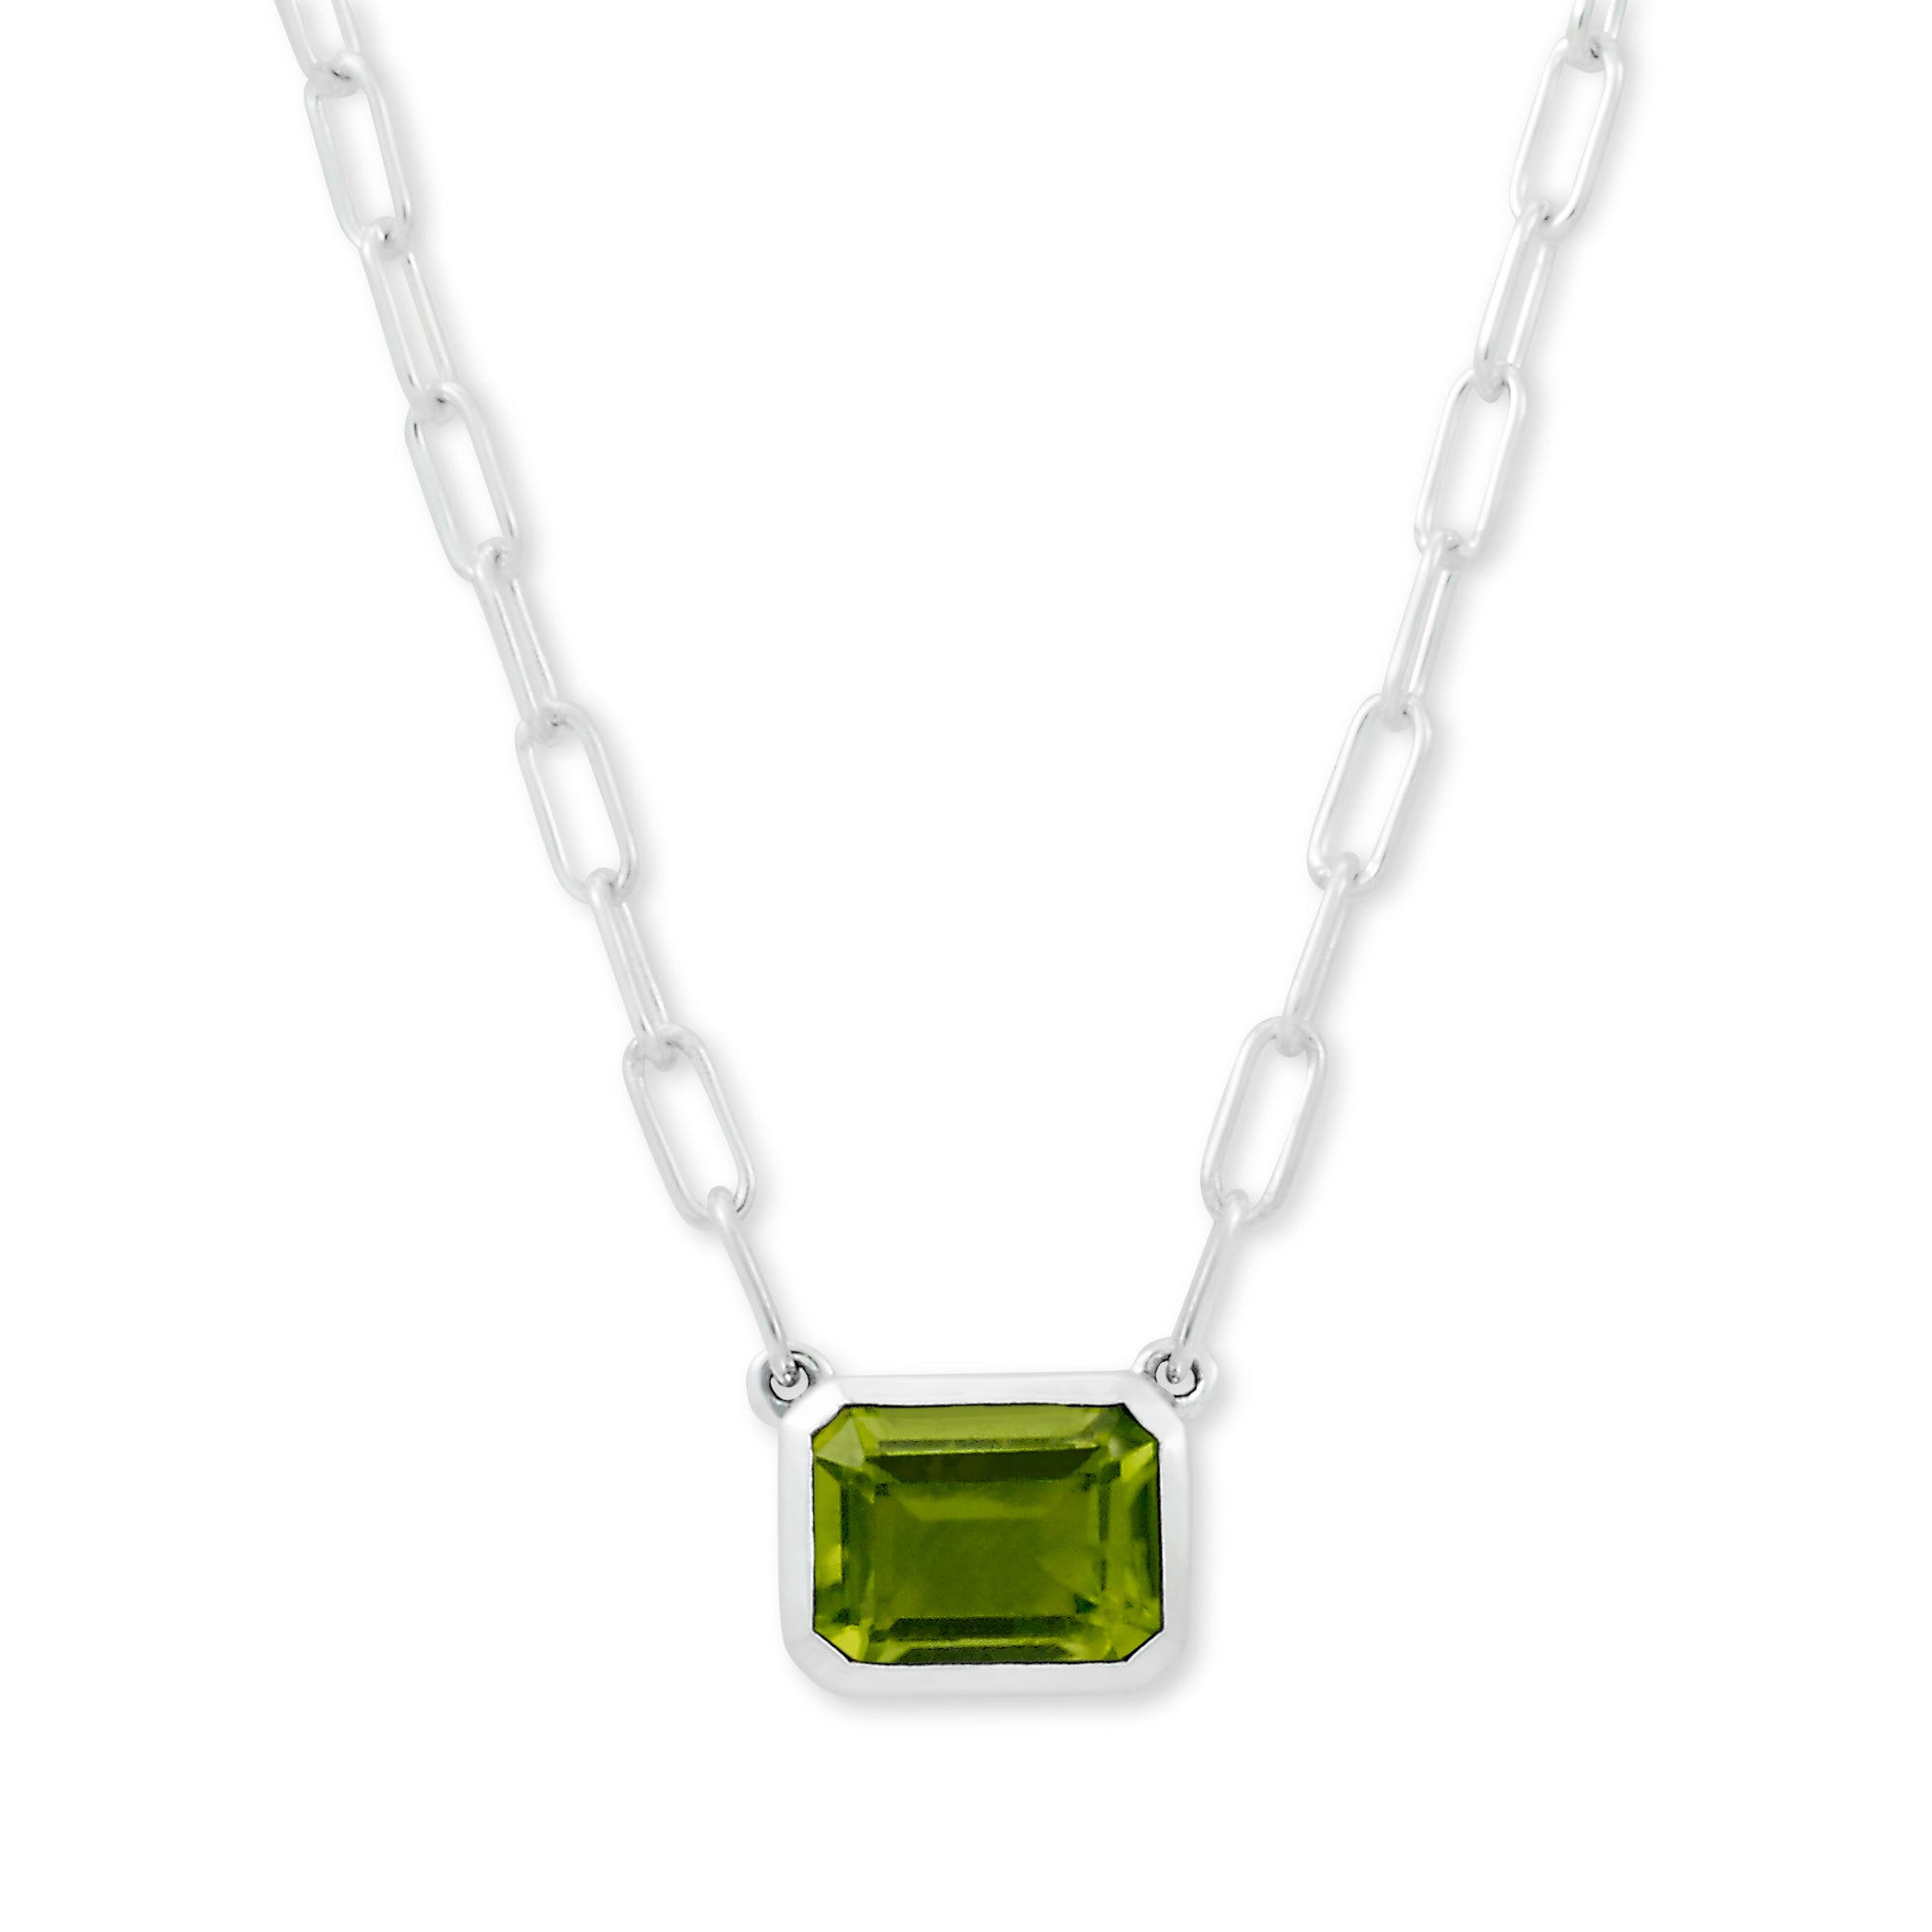 Peridot Eirini Necklace available at Talisman Collection Fine Jewelers in El Dorado Hills, CA and online. Specs: Peridot Eirini Necklace features an emerald-cut peridot measuring 7x9mm and is set in Sterling Silver.